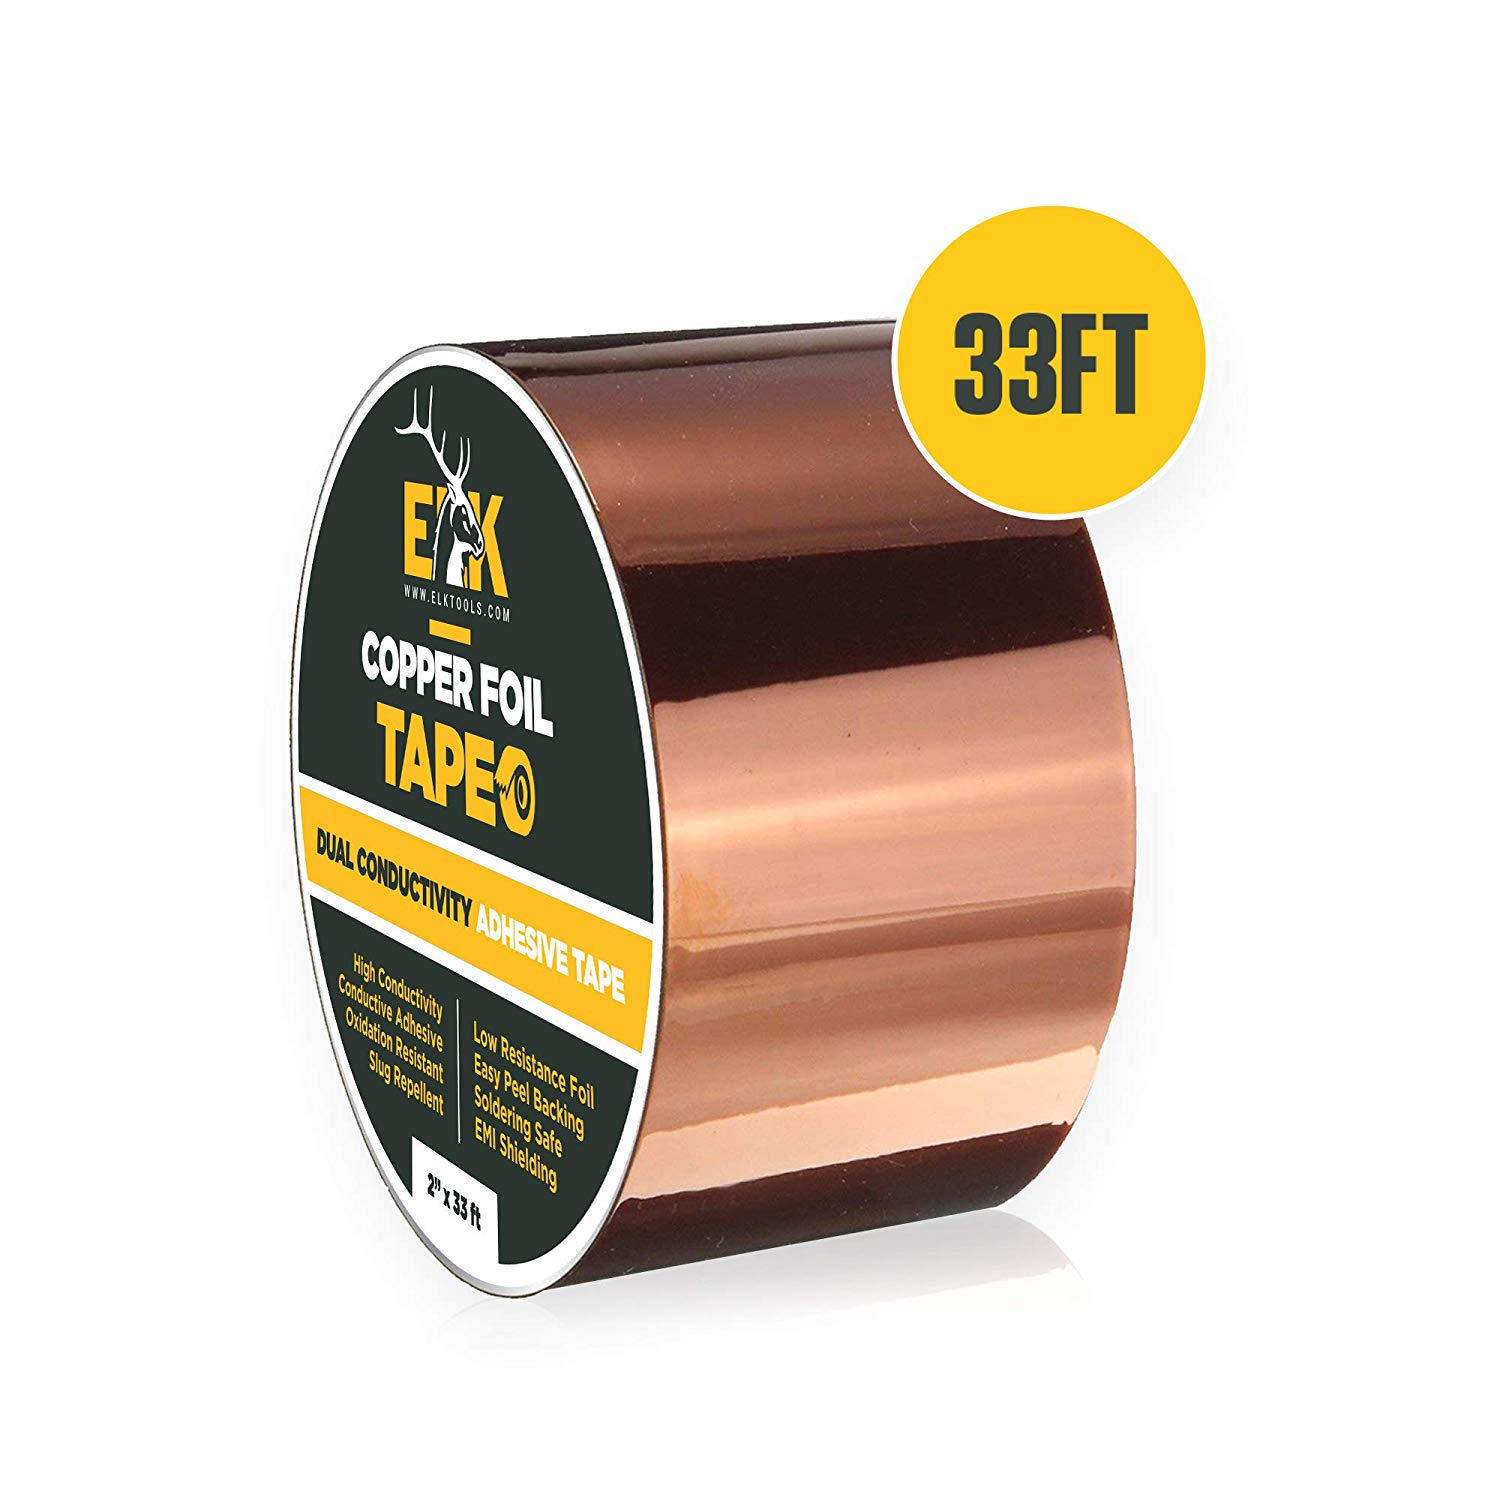 for Guitar and EMI Shielding 2 inch X 18 ft Electrical Repairs Crafts Slug Repellent Grounding Copper Foil Tape 2.6 Mil Total Thickness Conductive Adhesive Special Wide for diverse application